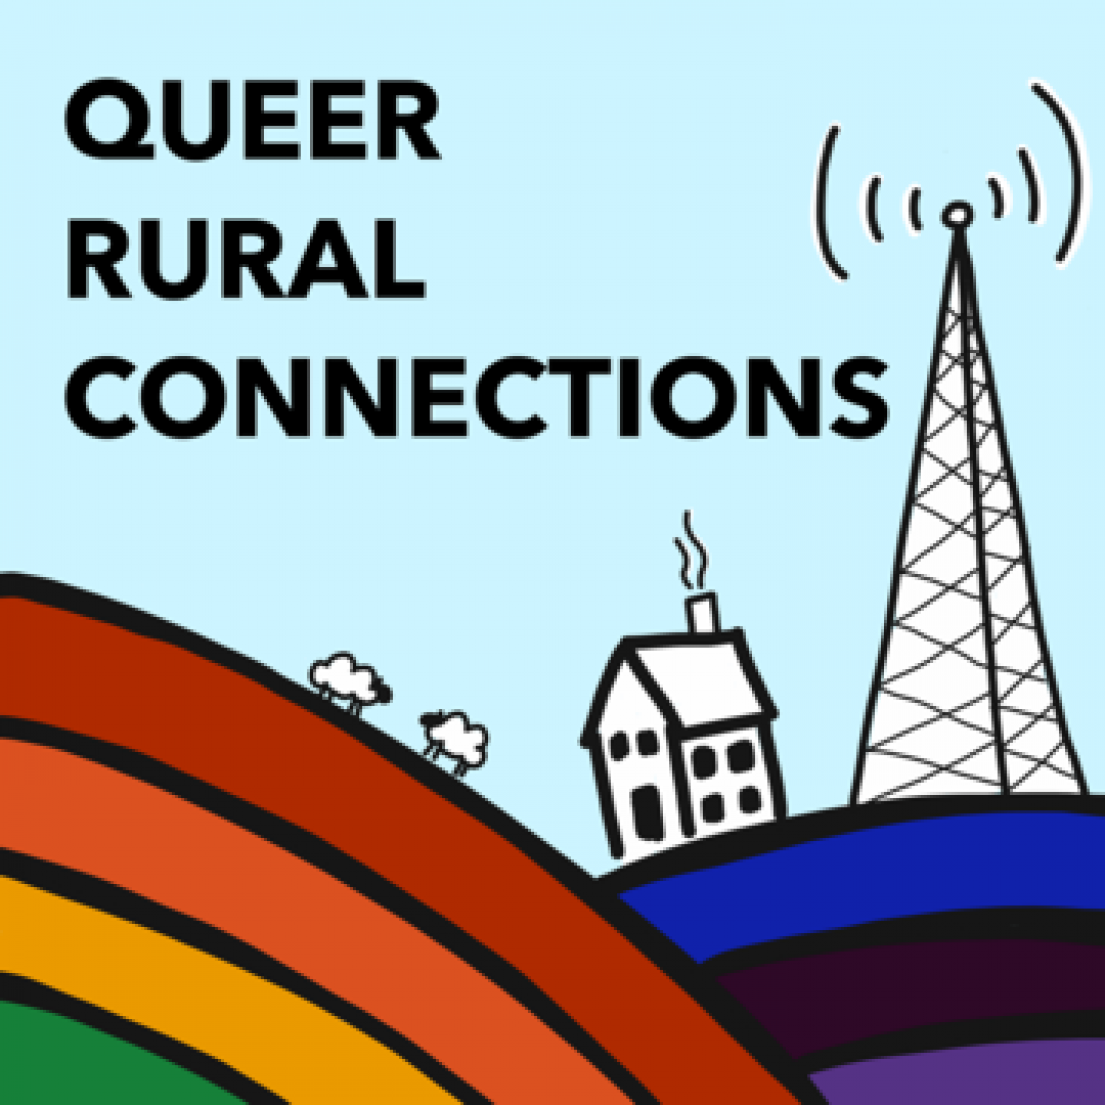 A drawn logo showing trees, a house and signalling tower on coloured pride rainbows. The text reads, Queer Rural Connections.